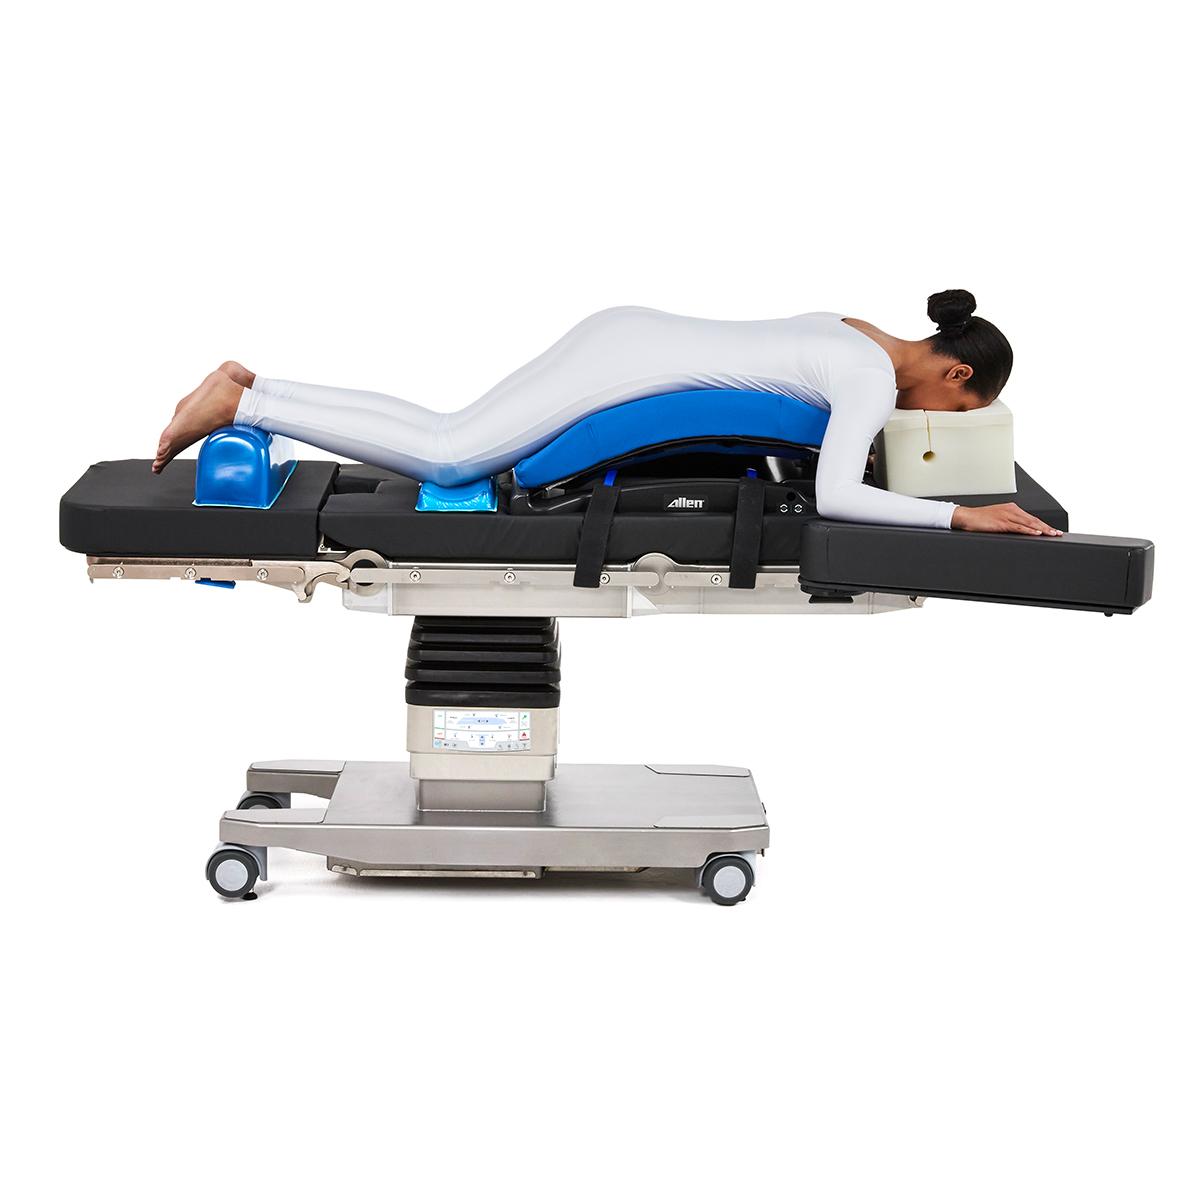 Patient positioned on Hillrom surgical table equipped with Prone Bow Frame accessories.